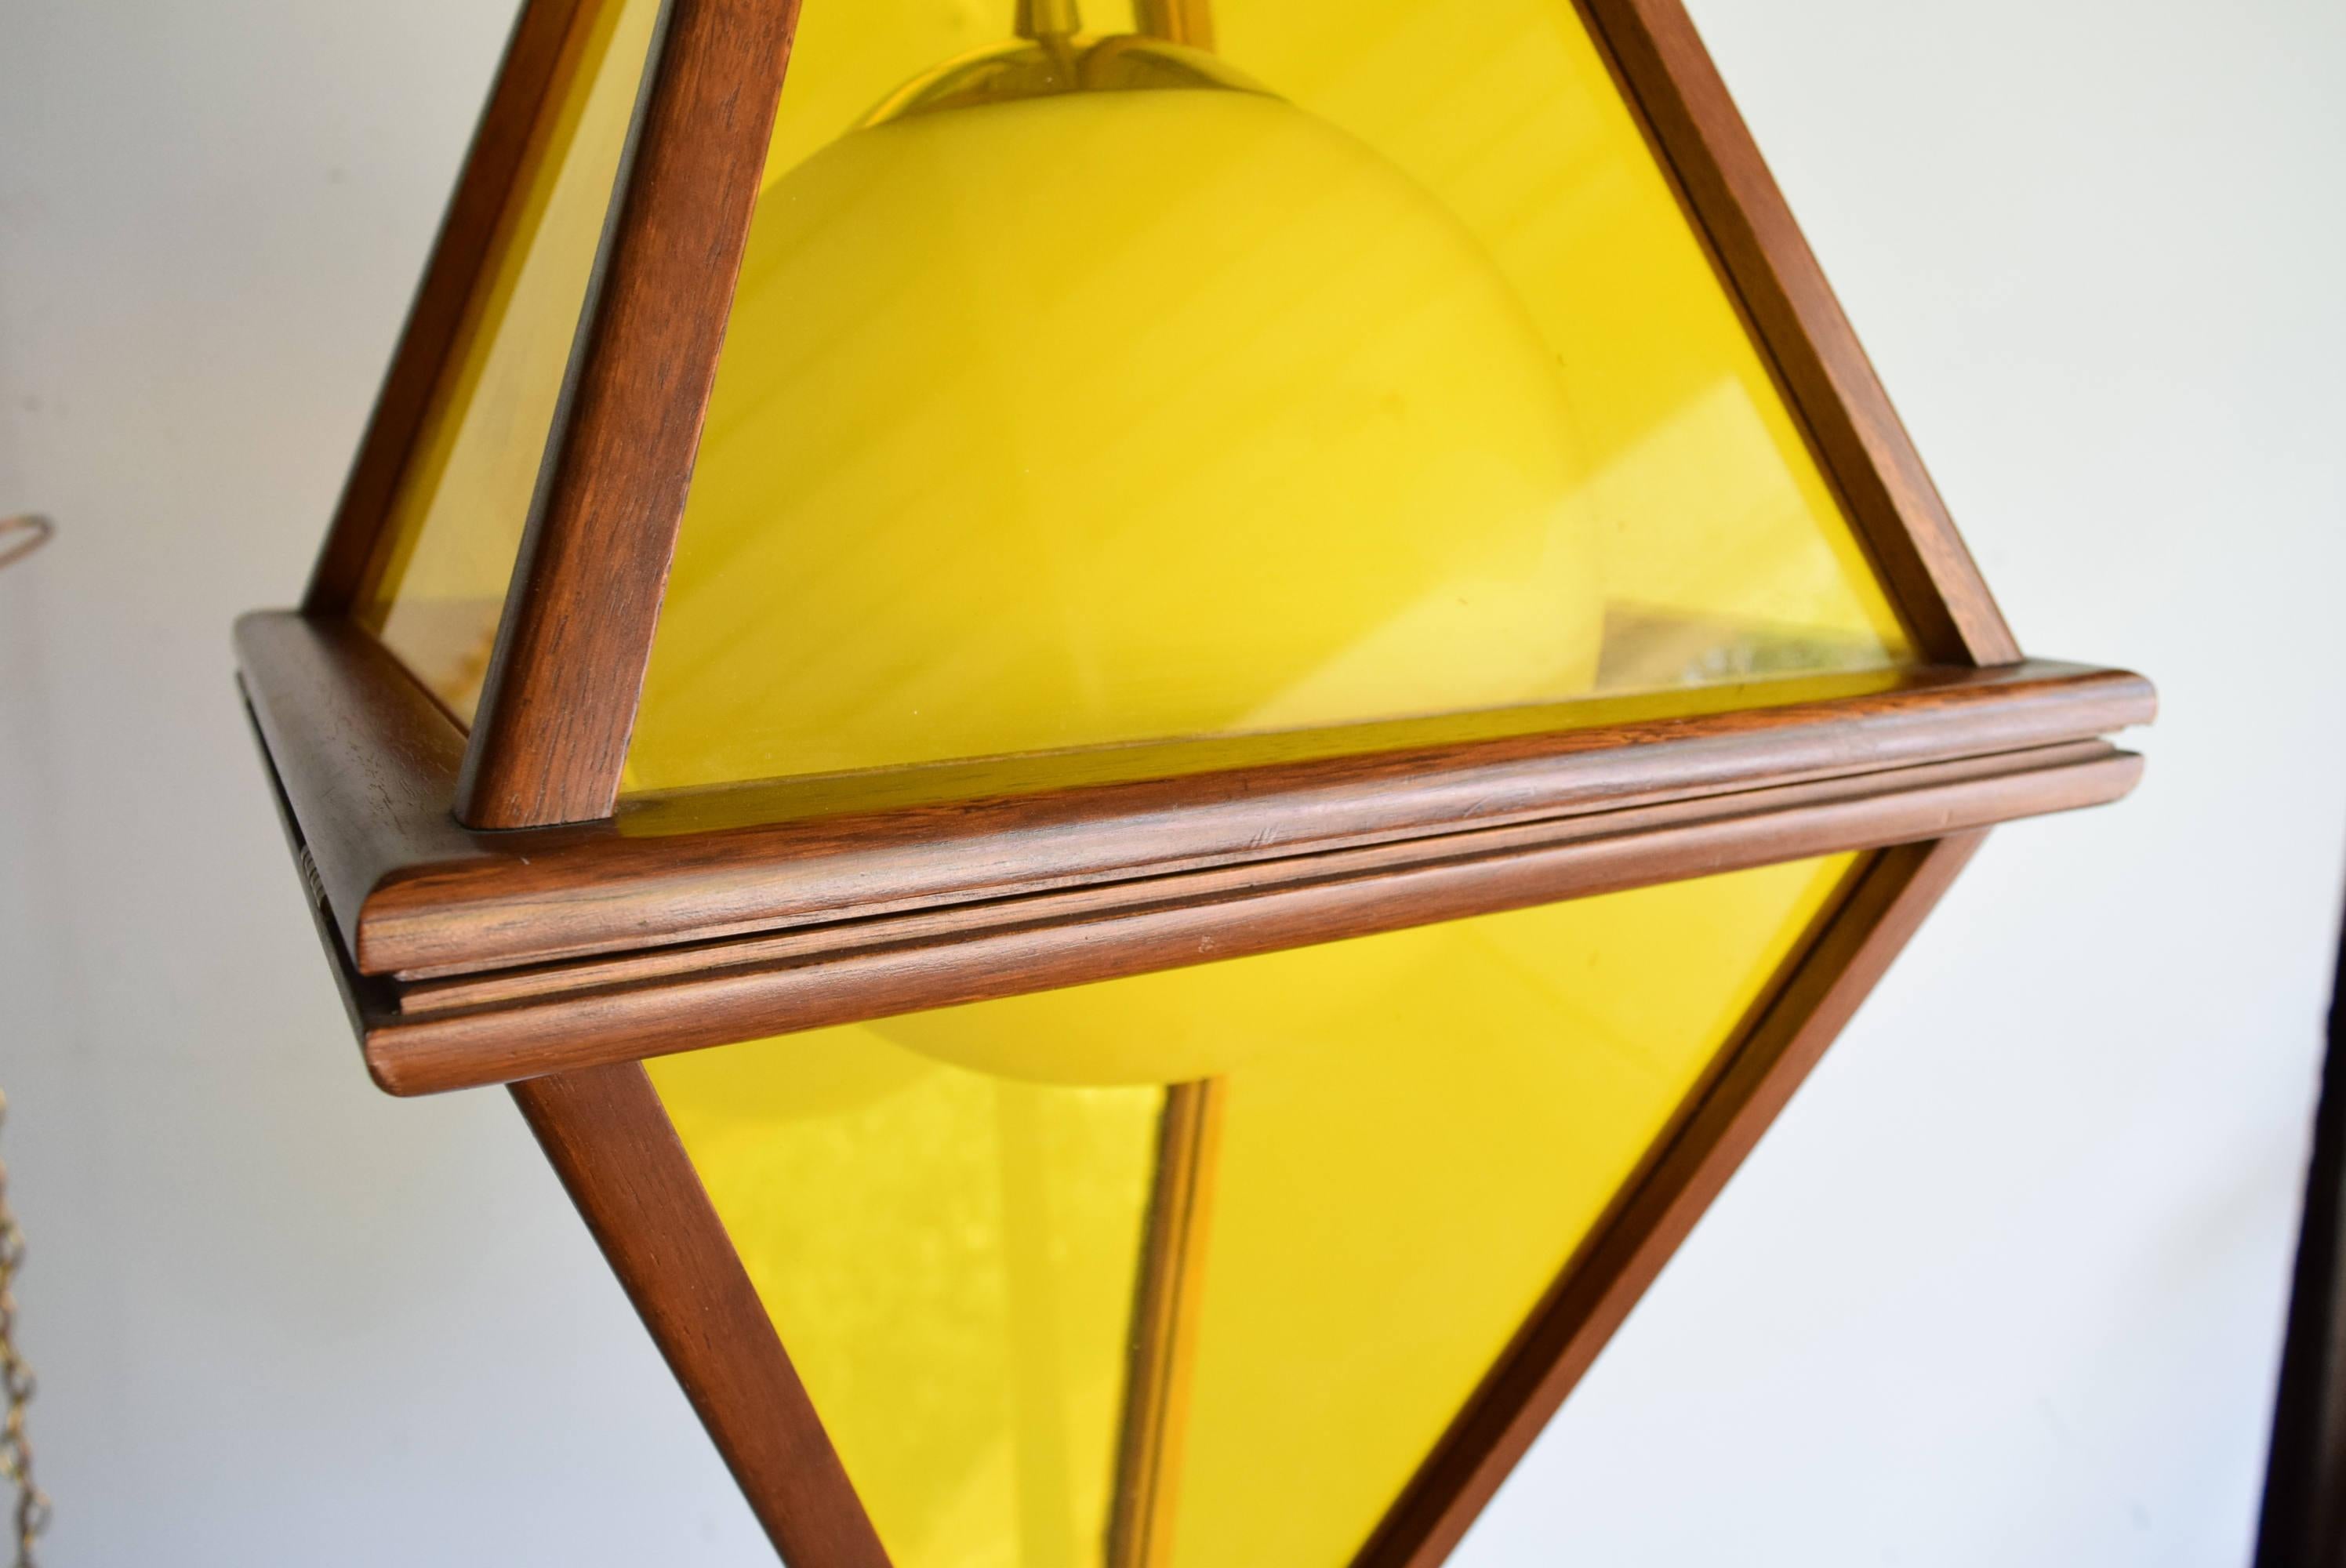 Midcentury Danish Modern Teak and Yellow Acrylic Hanging Pendant Light In Good Condition For Sale In Detroit, MI